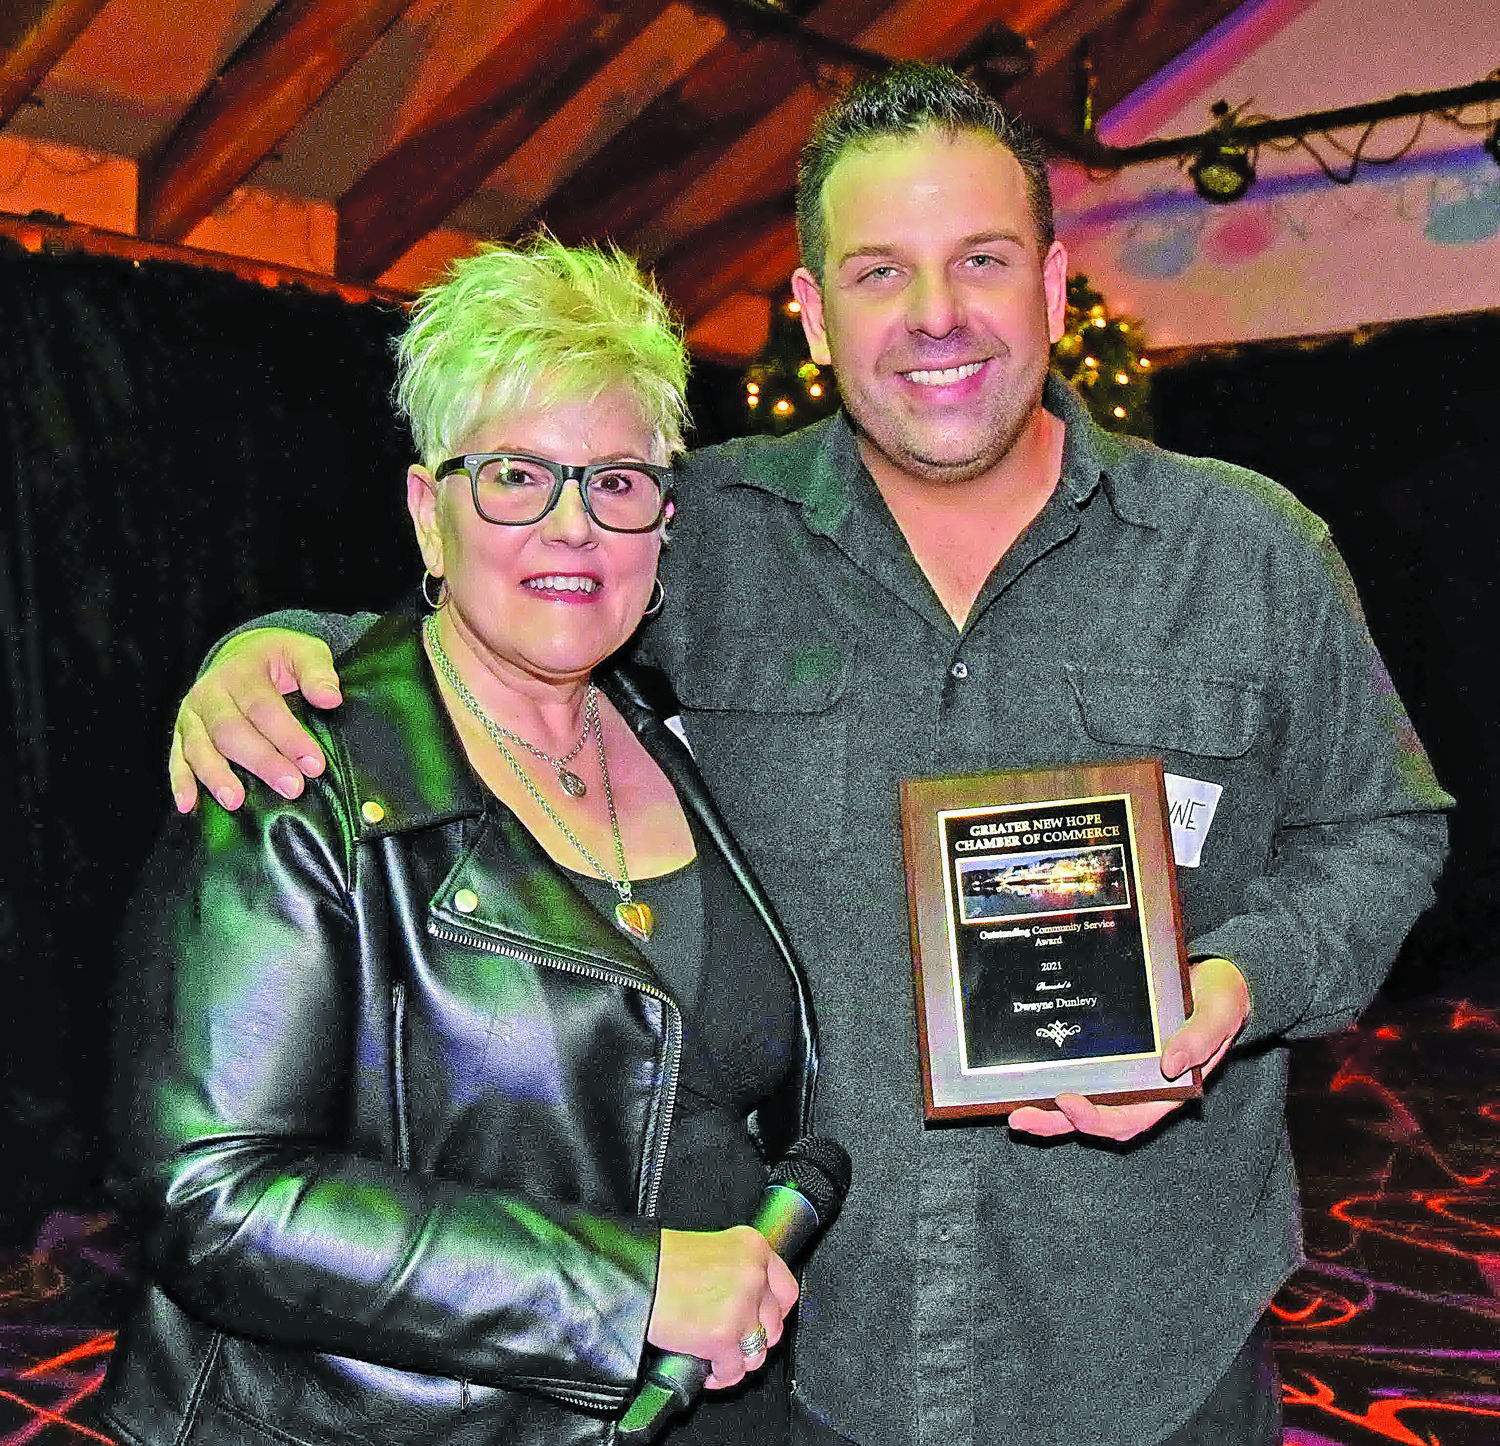 Entertainer Dwayne Dunlevy receives the Outstanding Community service award.